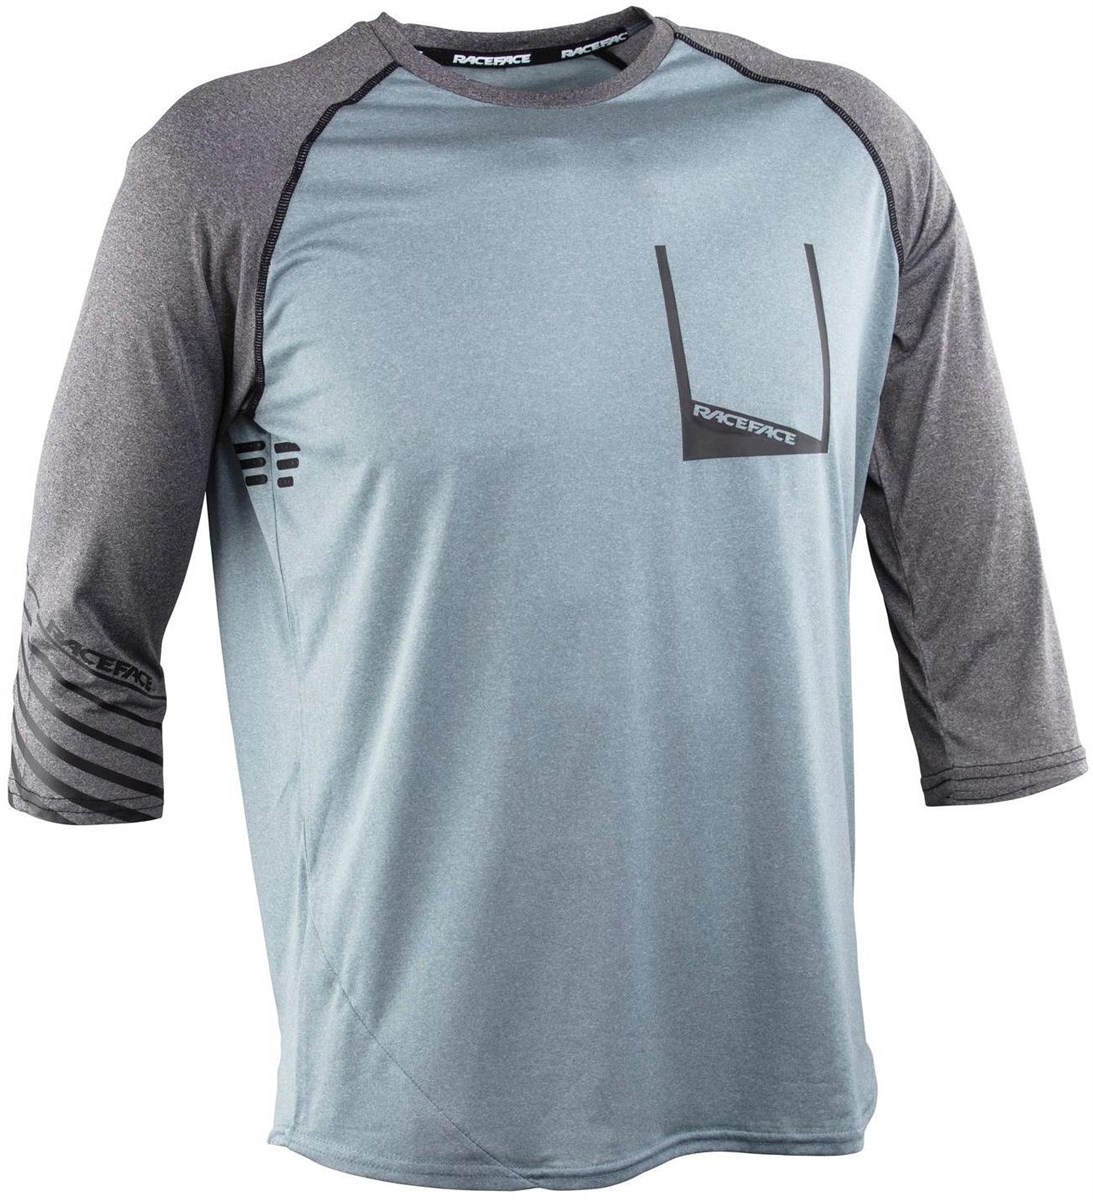 Race Face Stage 3/4 Sleeve Jersey product image